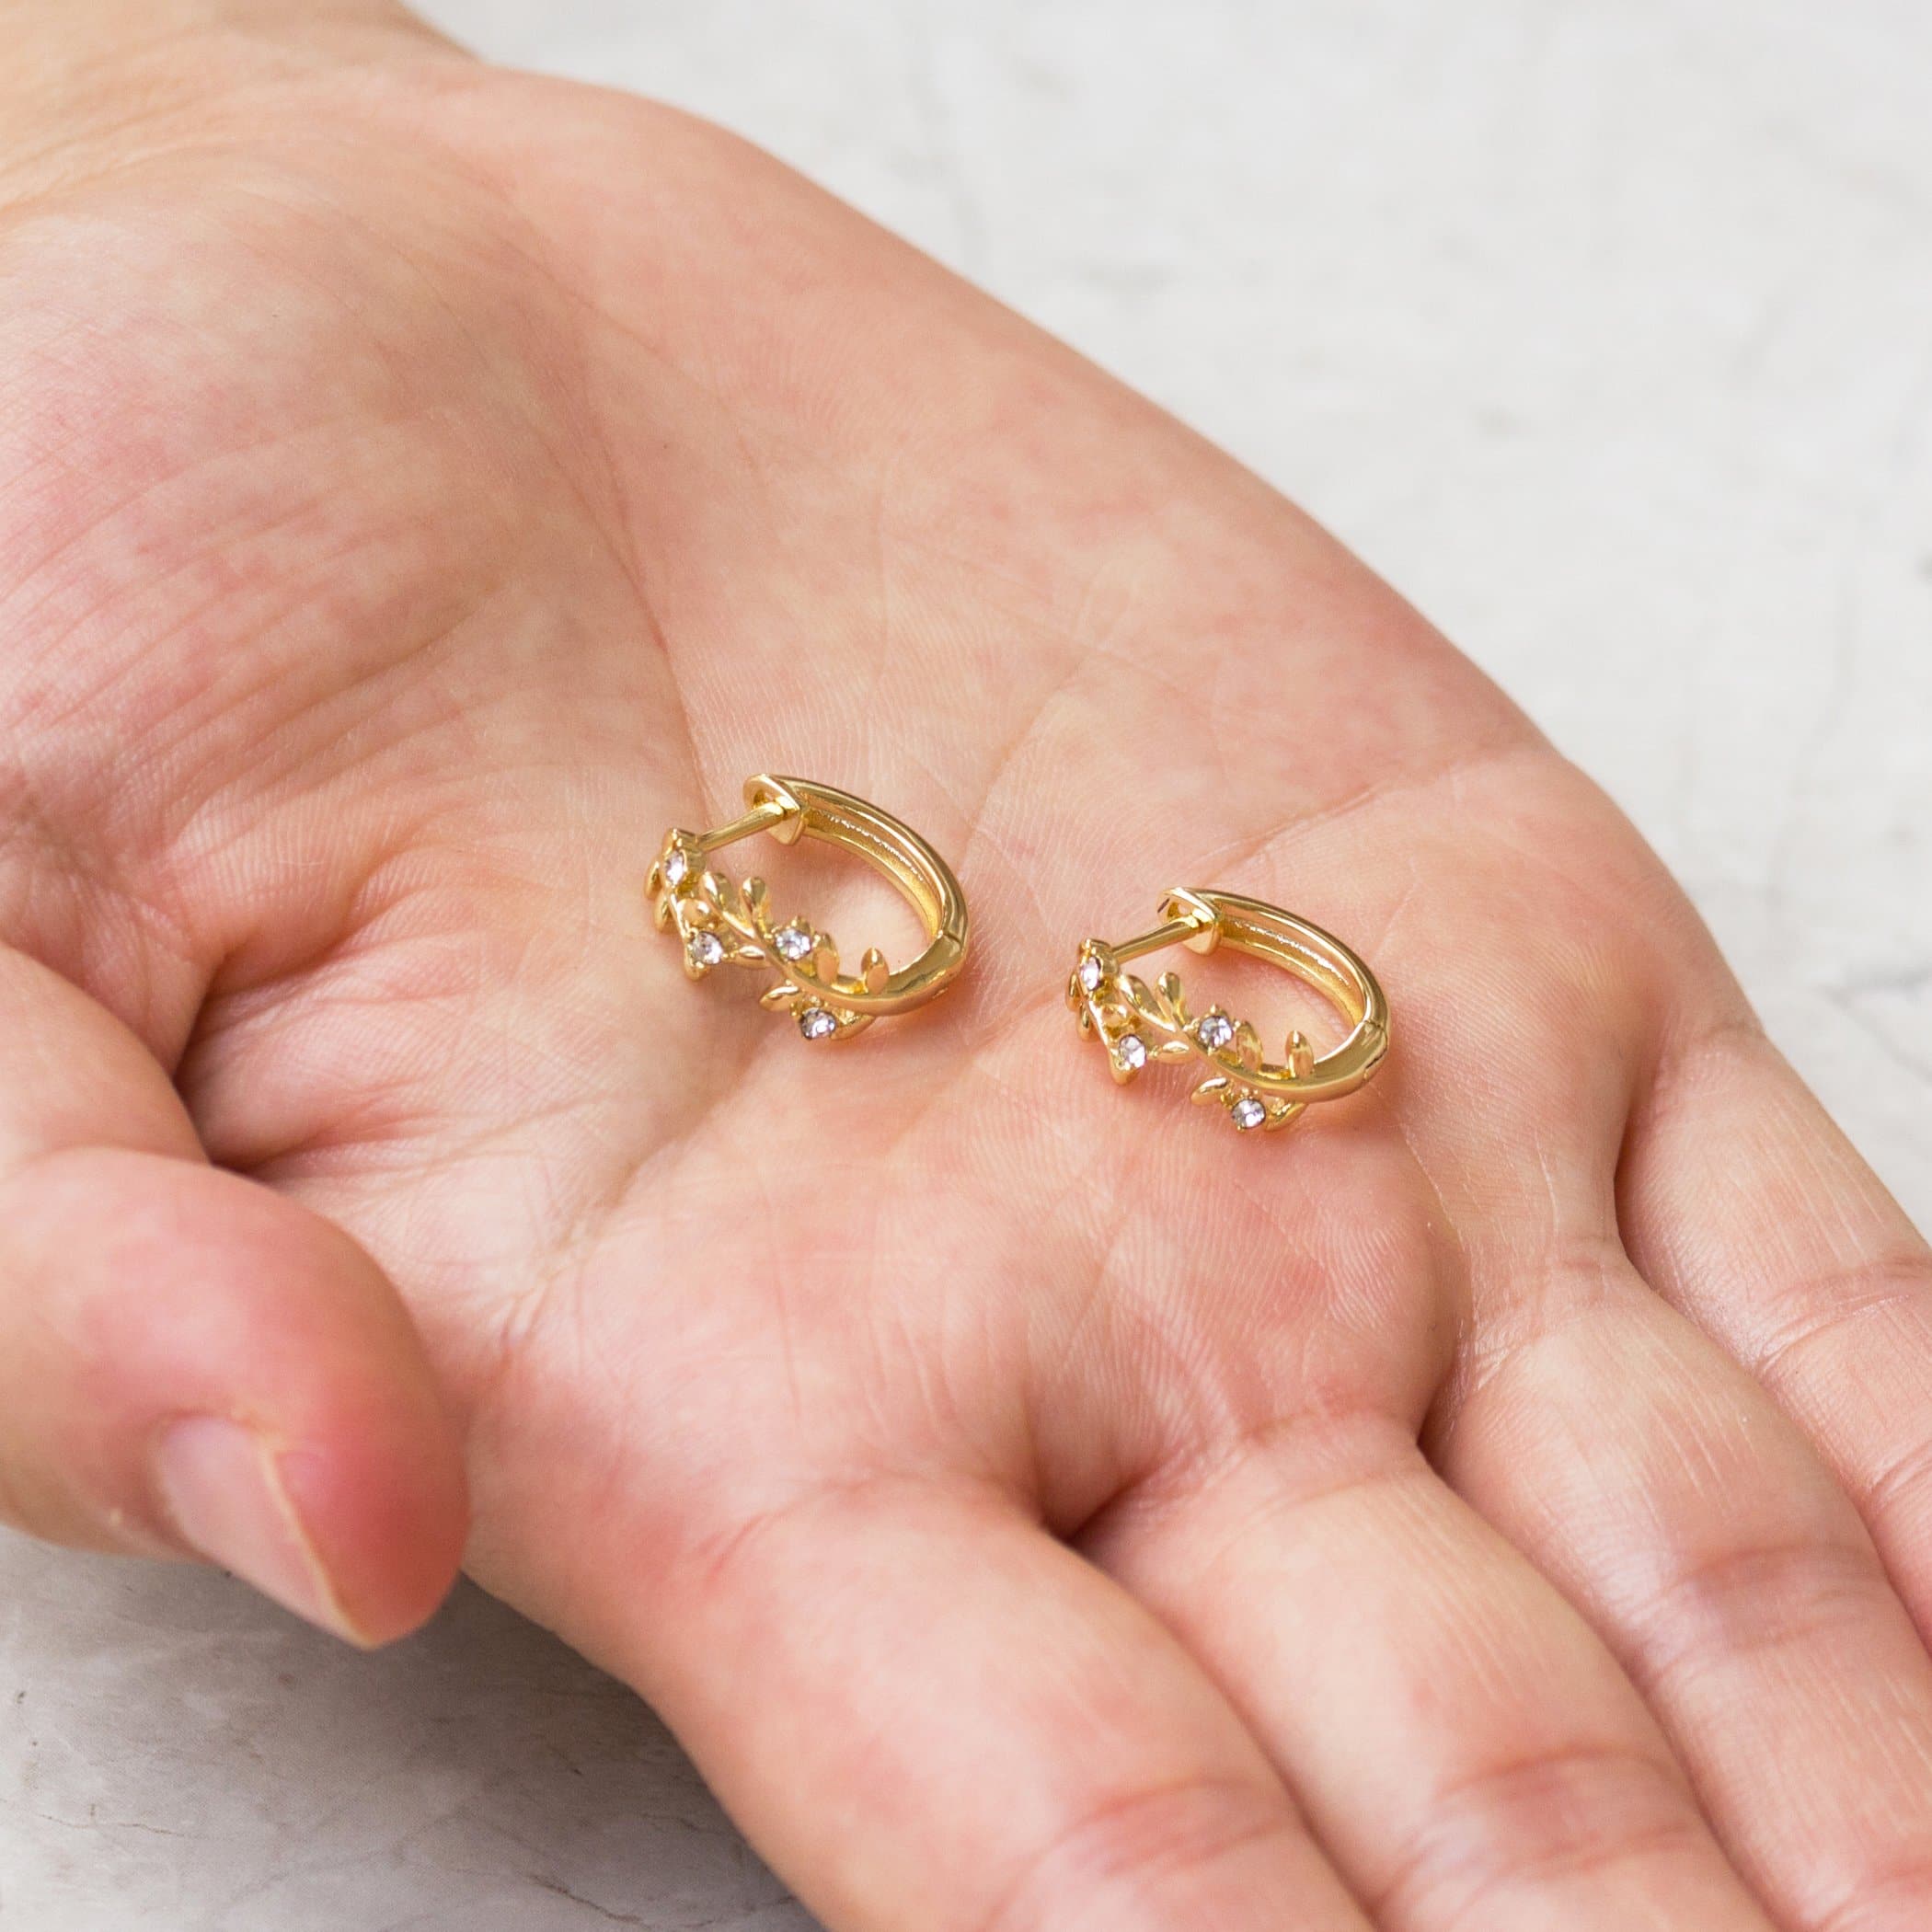 Gold Plated Leaf Hoop Earrings Created with Zircondia® Crystals